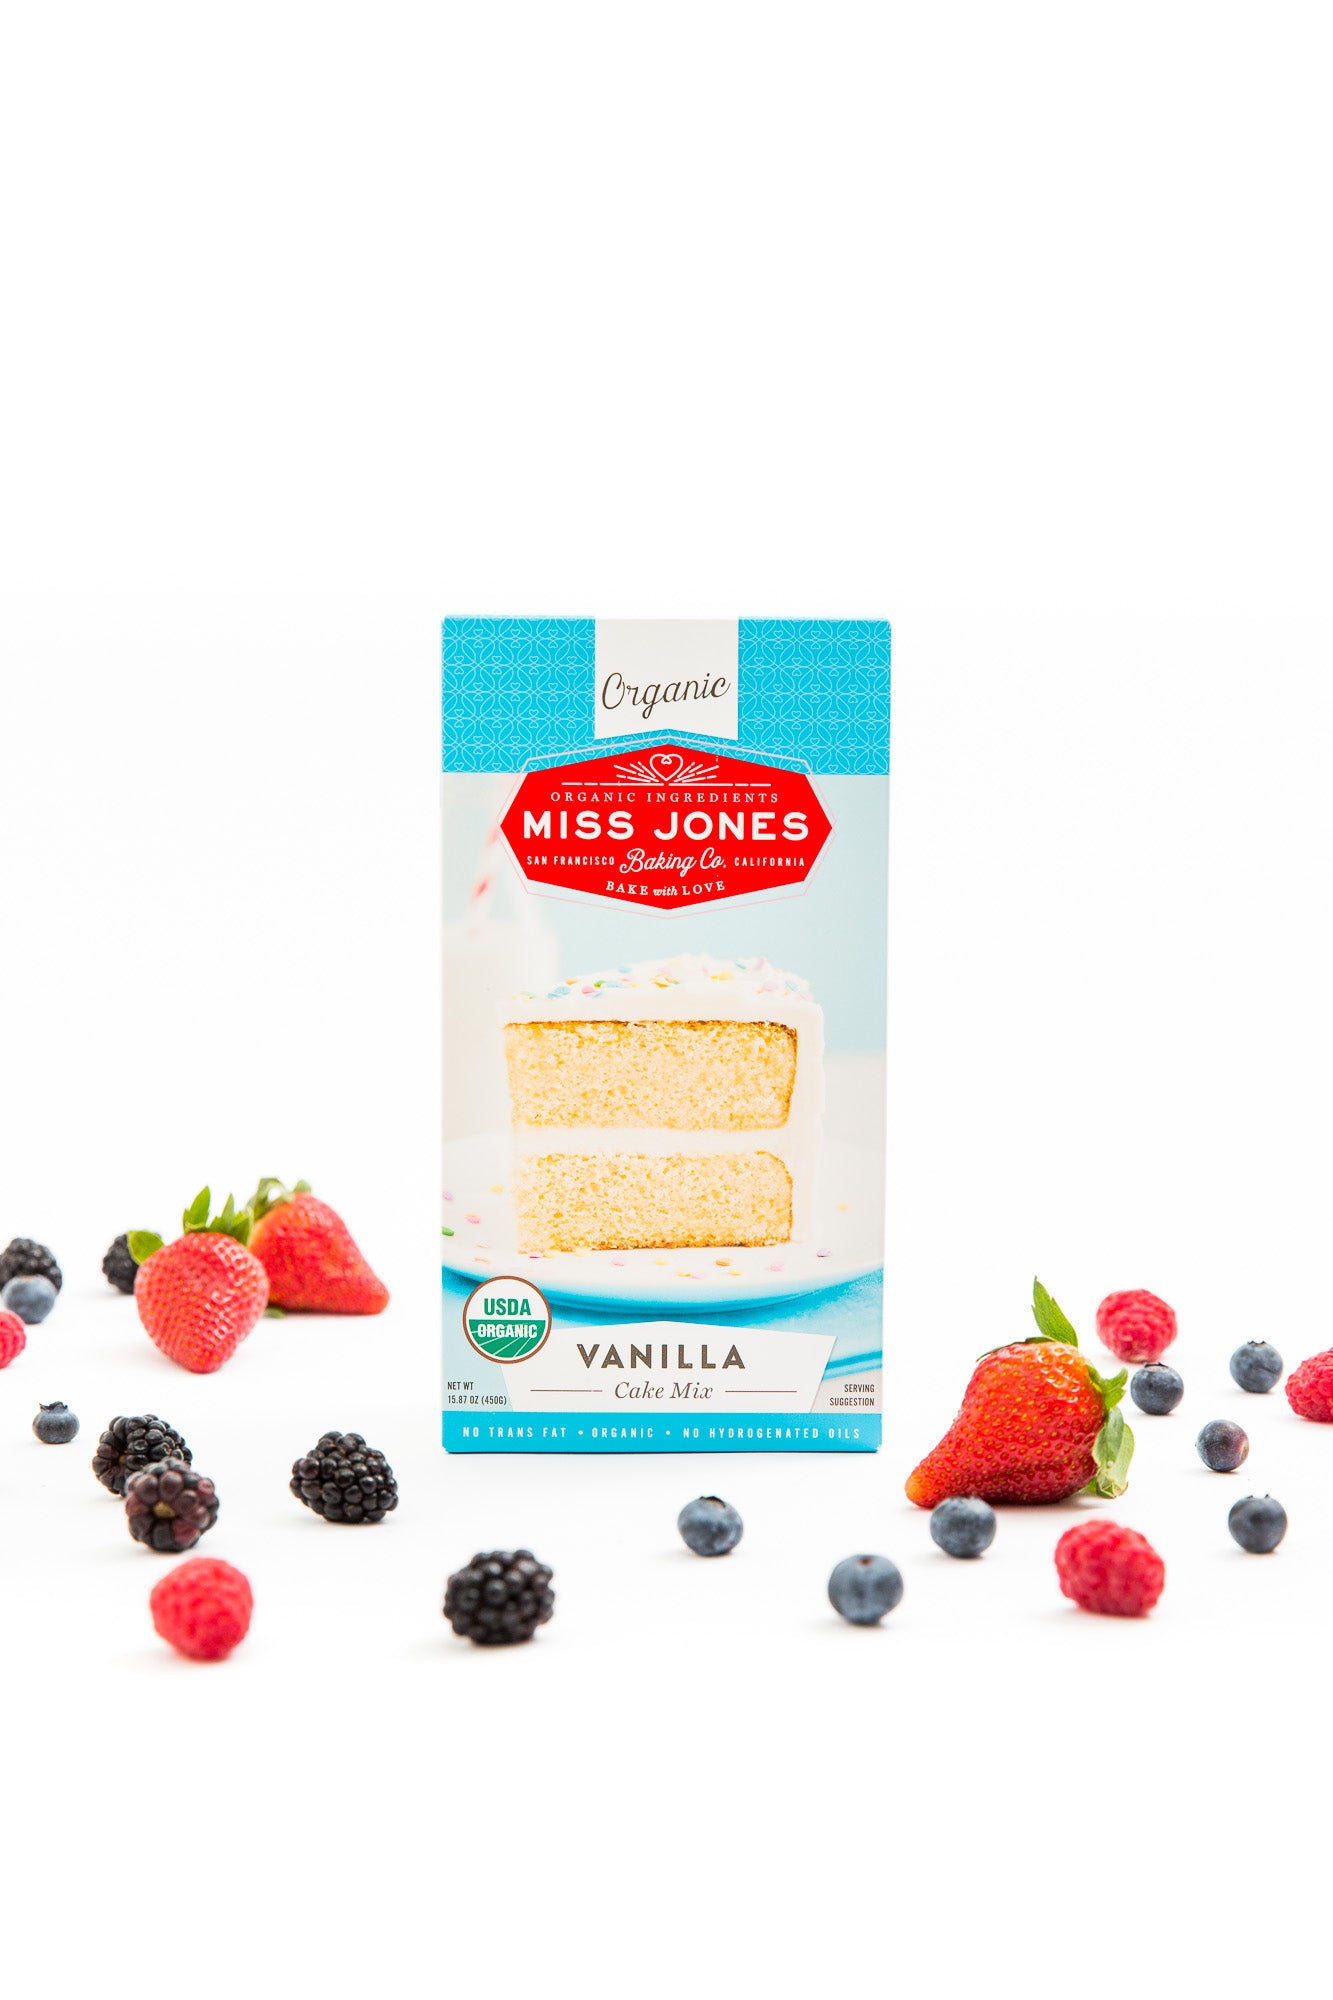 Image of a box of Miss Jones Vanilla Cake Mix surrounded by blueberries, blackberries and strawberries for Miss Jones Baking Co Mini Berry Crumbles Recipe